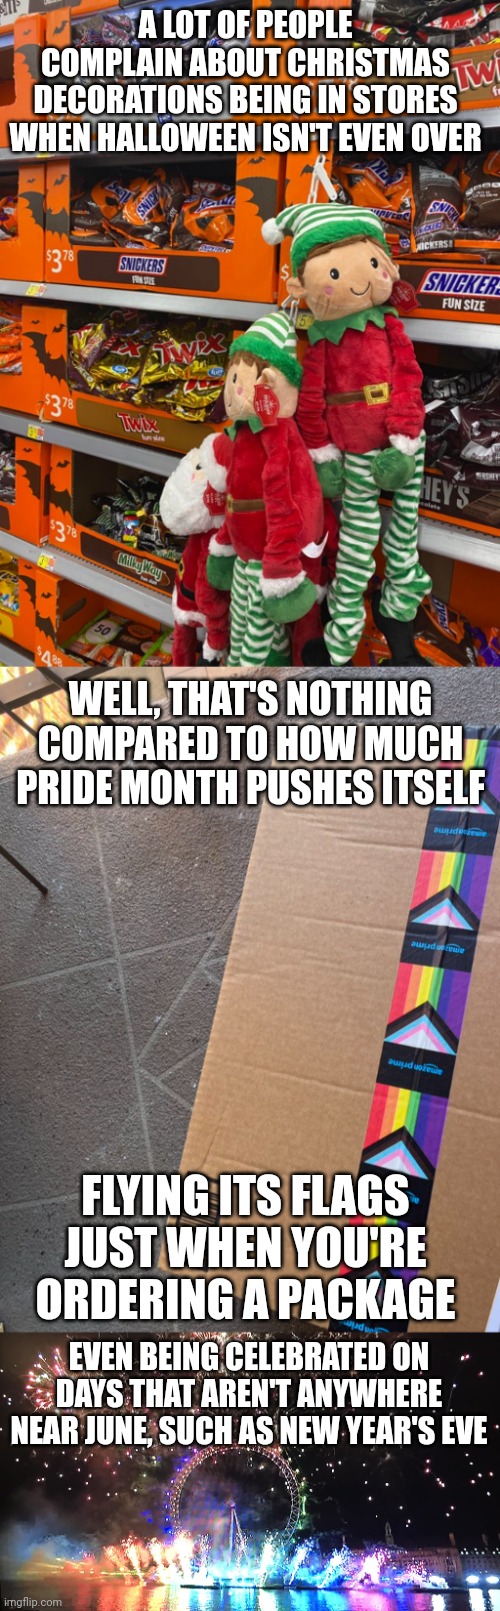 Christmas is celebrated too early but that's nothing compared to how much pride month pushes itself | A LOT OF PEOPLE COMPLAIN ABOUT CHRISTMAS DECORATIONS BEING IN STORES WHEN HALLOWEEN ISN'T EVEN OVER; WELL, THAT'S NOTHING COMPARED TO HOW MUCH PRIDE MONTH PUSHES ITSELF; FLYING ITS FLAGS JUST WHEN YOU'RE ORDERING A PACKAGE; EVEN BEING CELEBRATED ON DAYS THAT AREN'T ANYWHERE NEAR JUNE, SUCH AS NEW YEAR'S EVE | image tagged in lgbtq,pride month,political correctness,sjws,gay pride | made w/ Imgflip meme maker